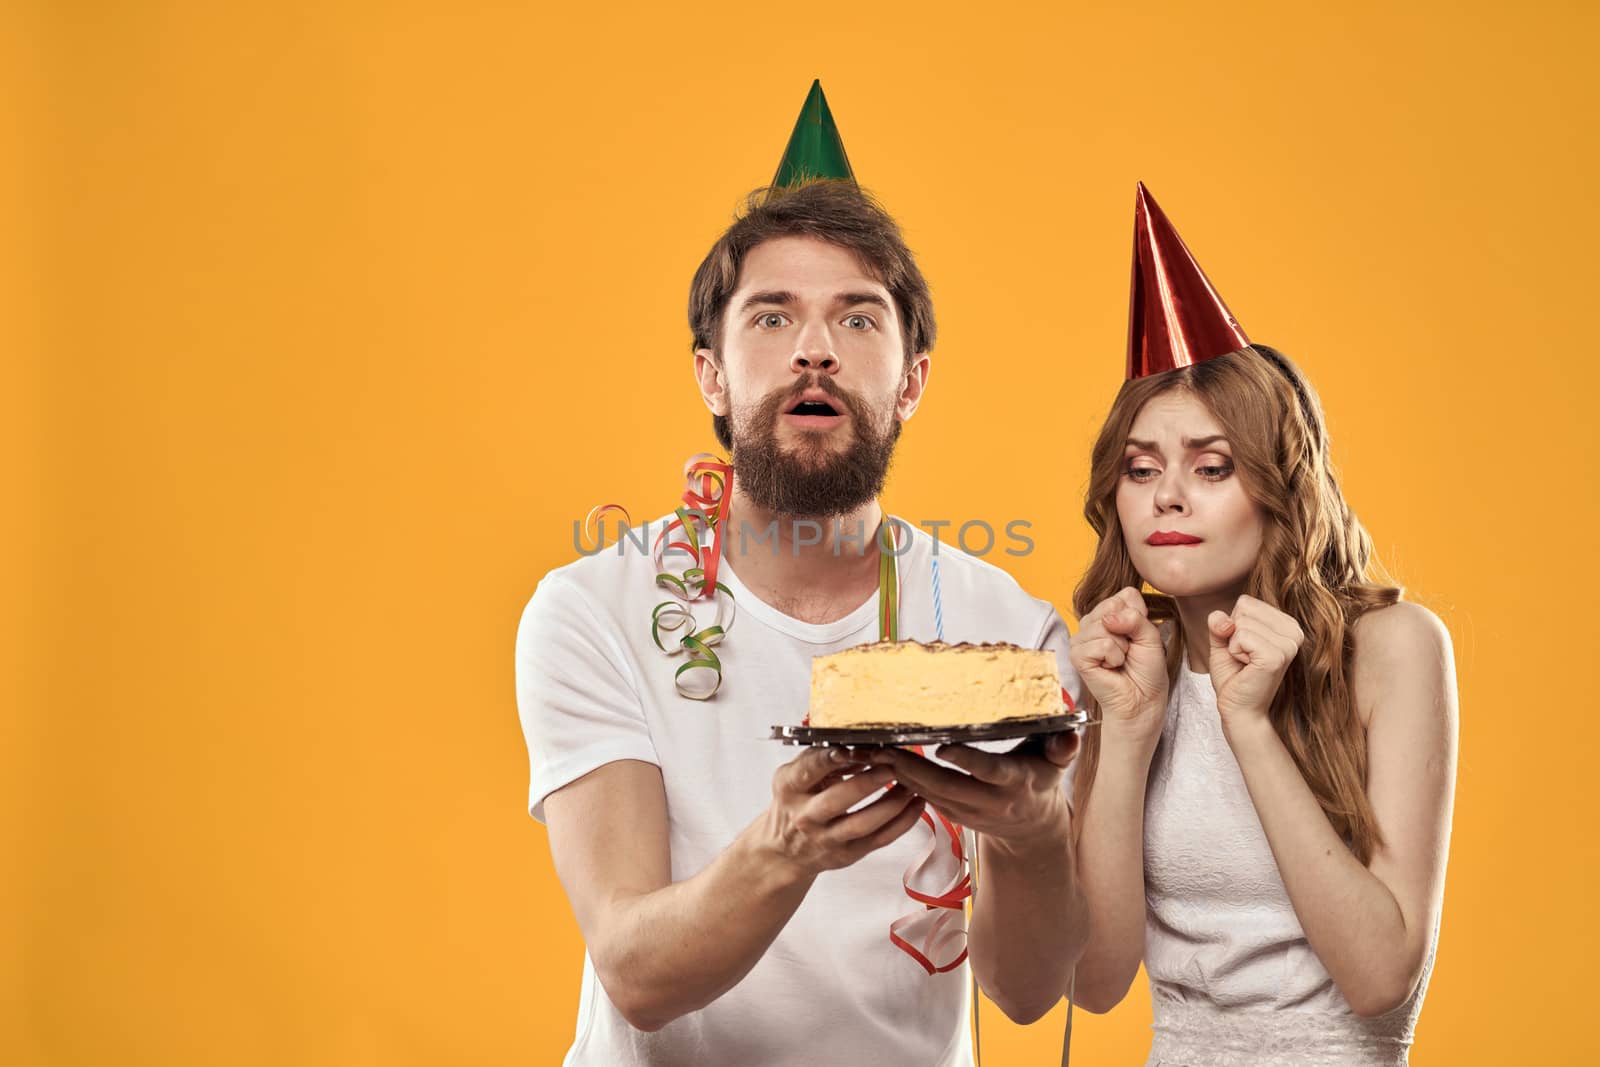 Happy man and woman in a cap celebrating a birthday on a yellow background with a cake in their hands. High quality photo